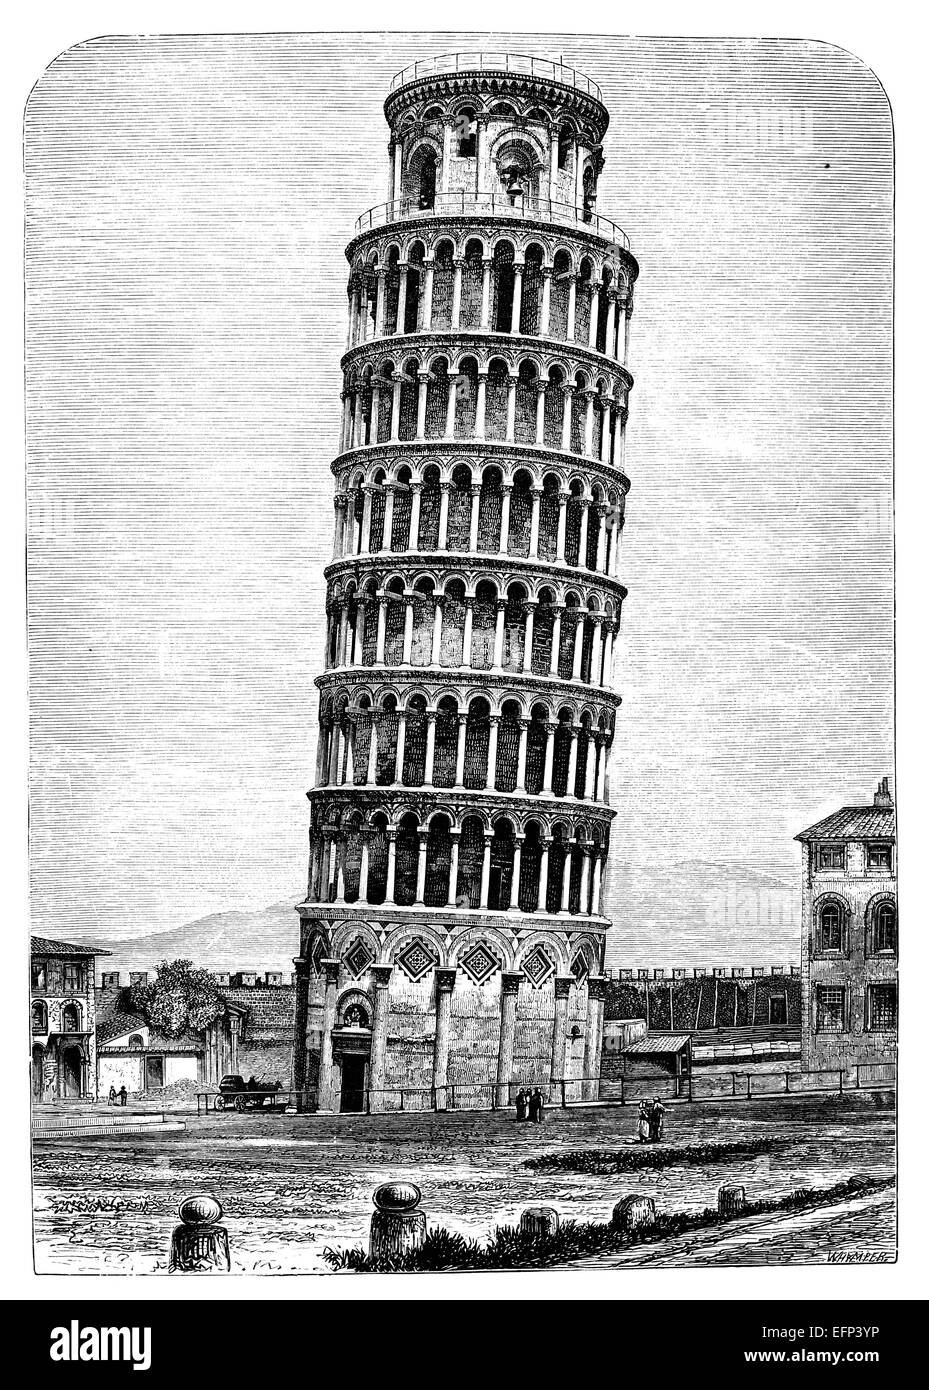 19th century engraving of Leaning Tower of Pisa, Italy Stock Photo